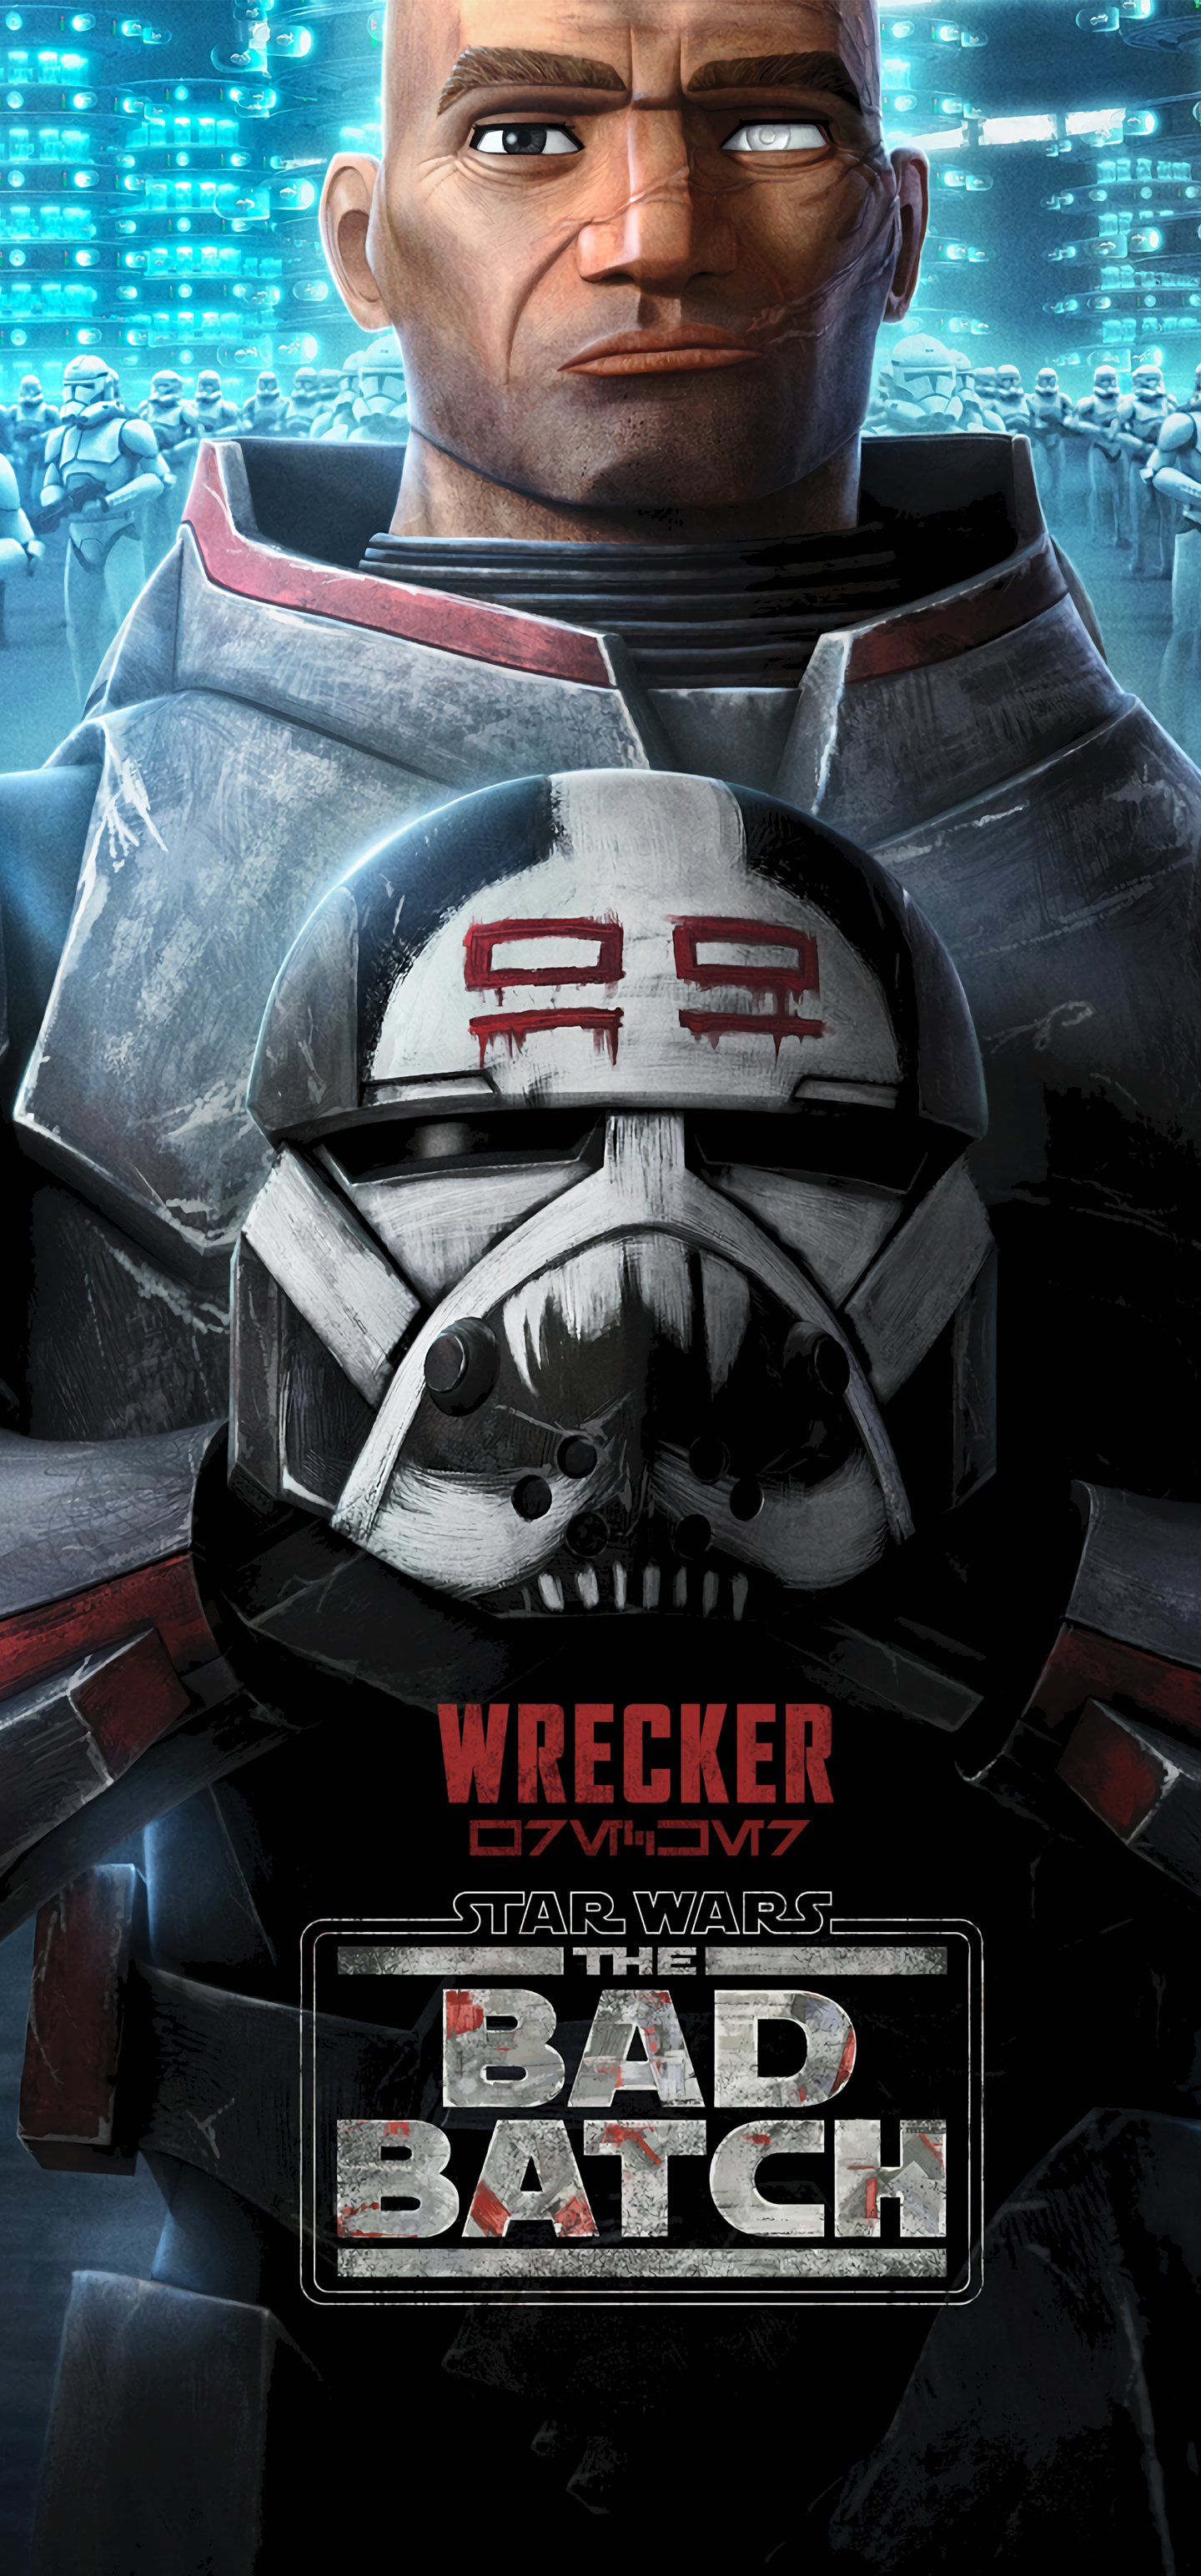 Star Wars: The Bad Batch: Wrecker, Much larger and stronger than the average clone trooper due to genetic mutations. 1440x3090 HD Wallpaper.